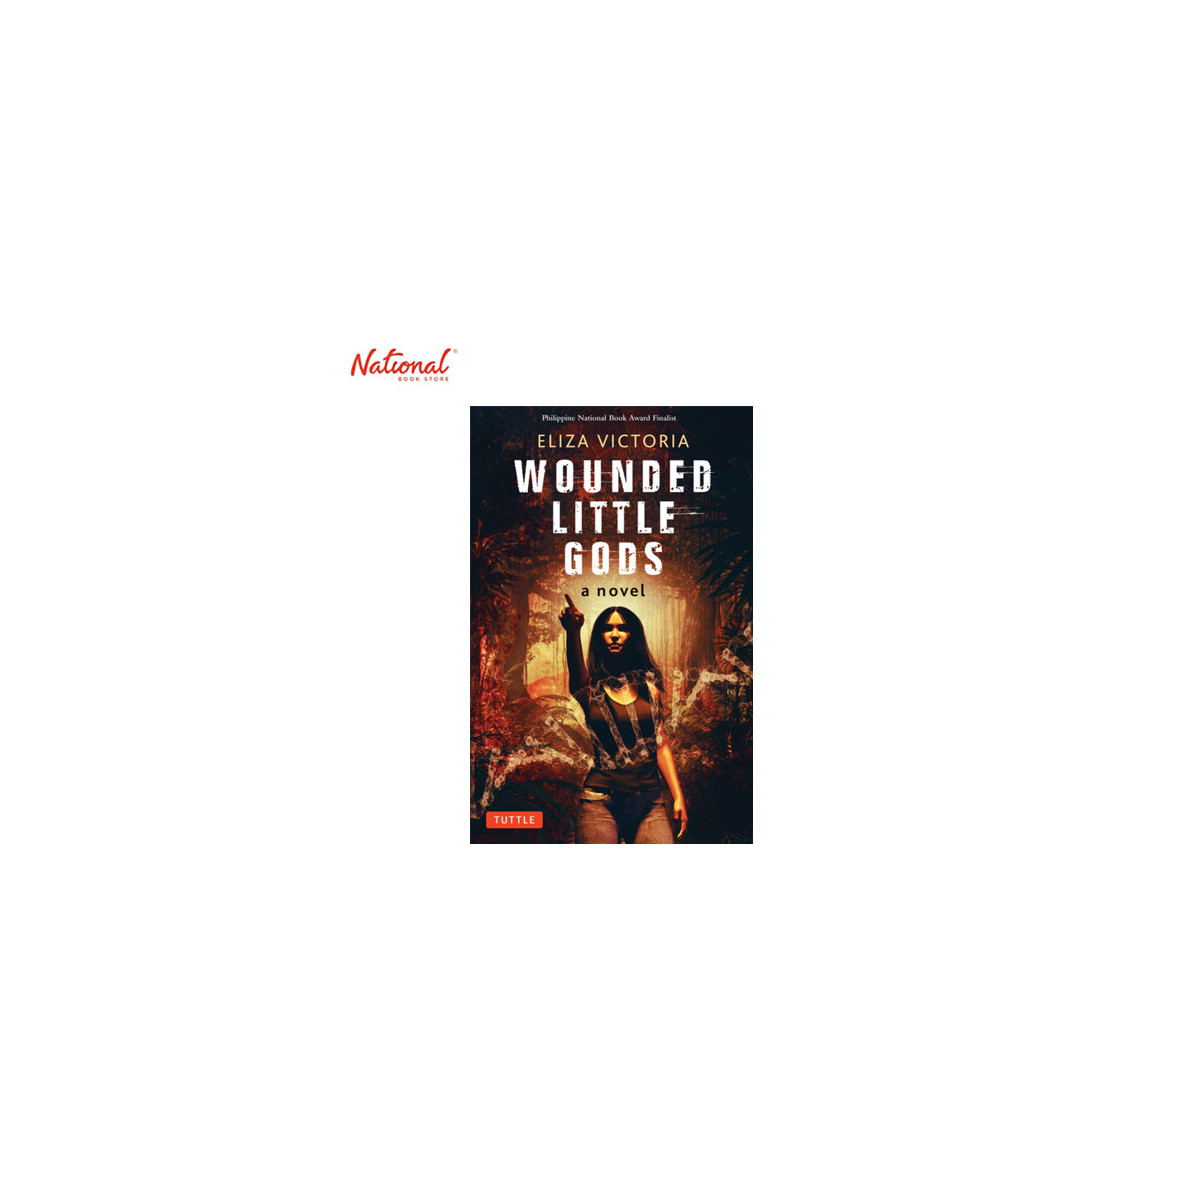 Wounded Little Gods: A Novel Hardcover by Eliza Victoria - Sci-Fi - Fantasy - Horror